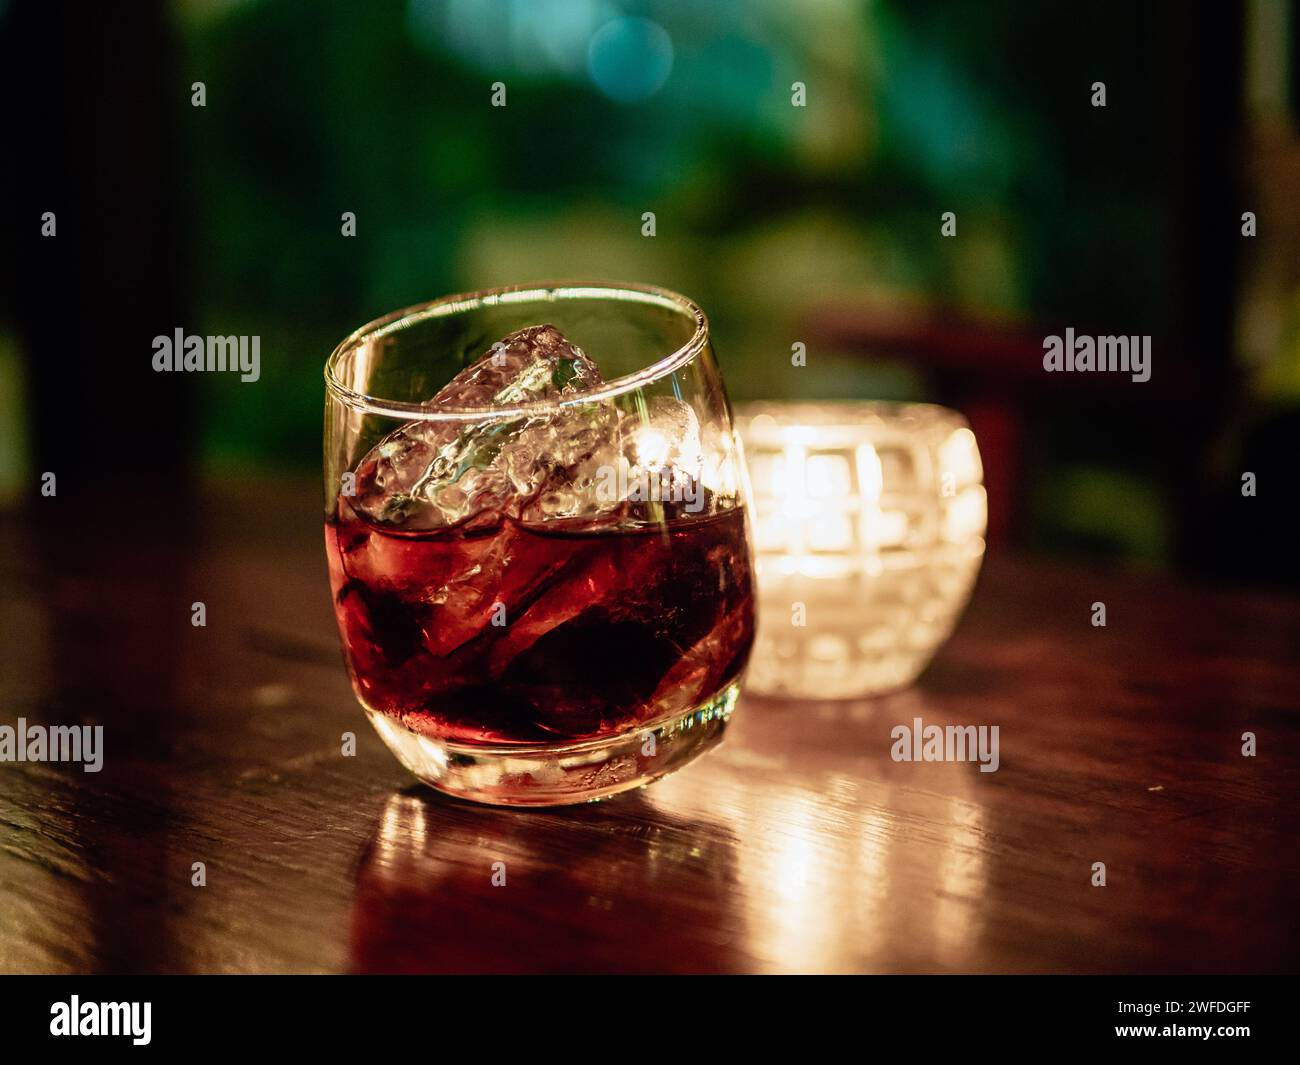 Glass of whisky with ice on wooden table against dark background. Elegant and refreshing glass of scotch bourbon whisky on ice with glowing illuminate Stock Photo